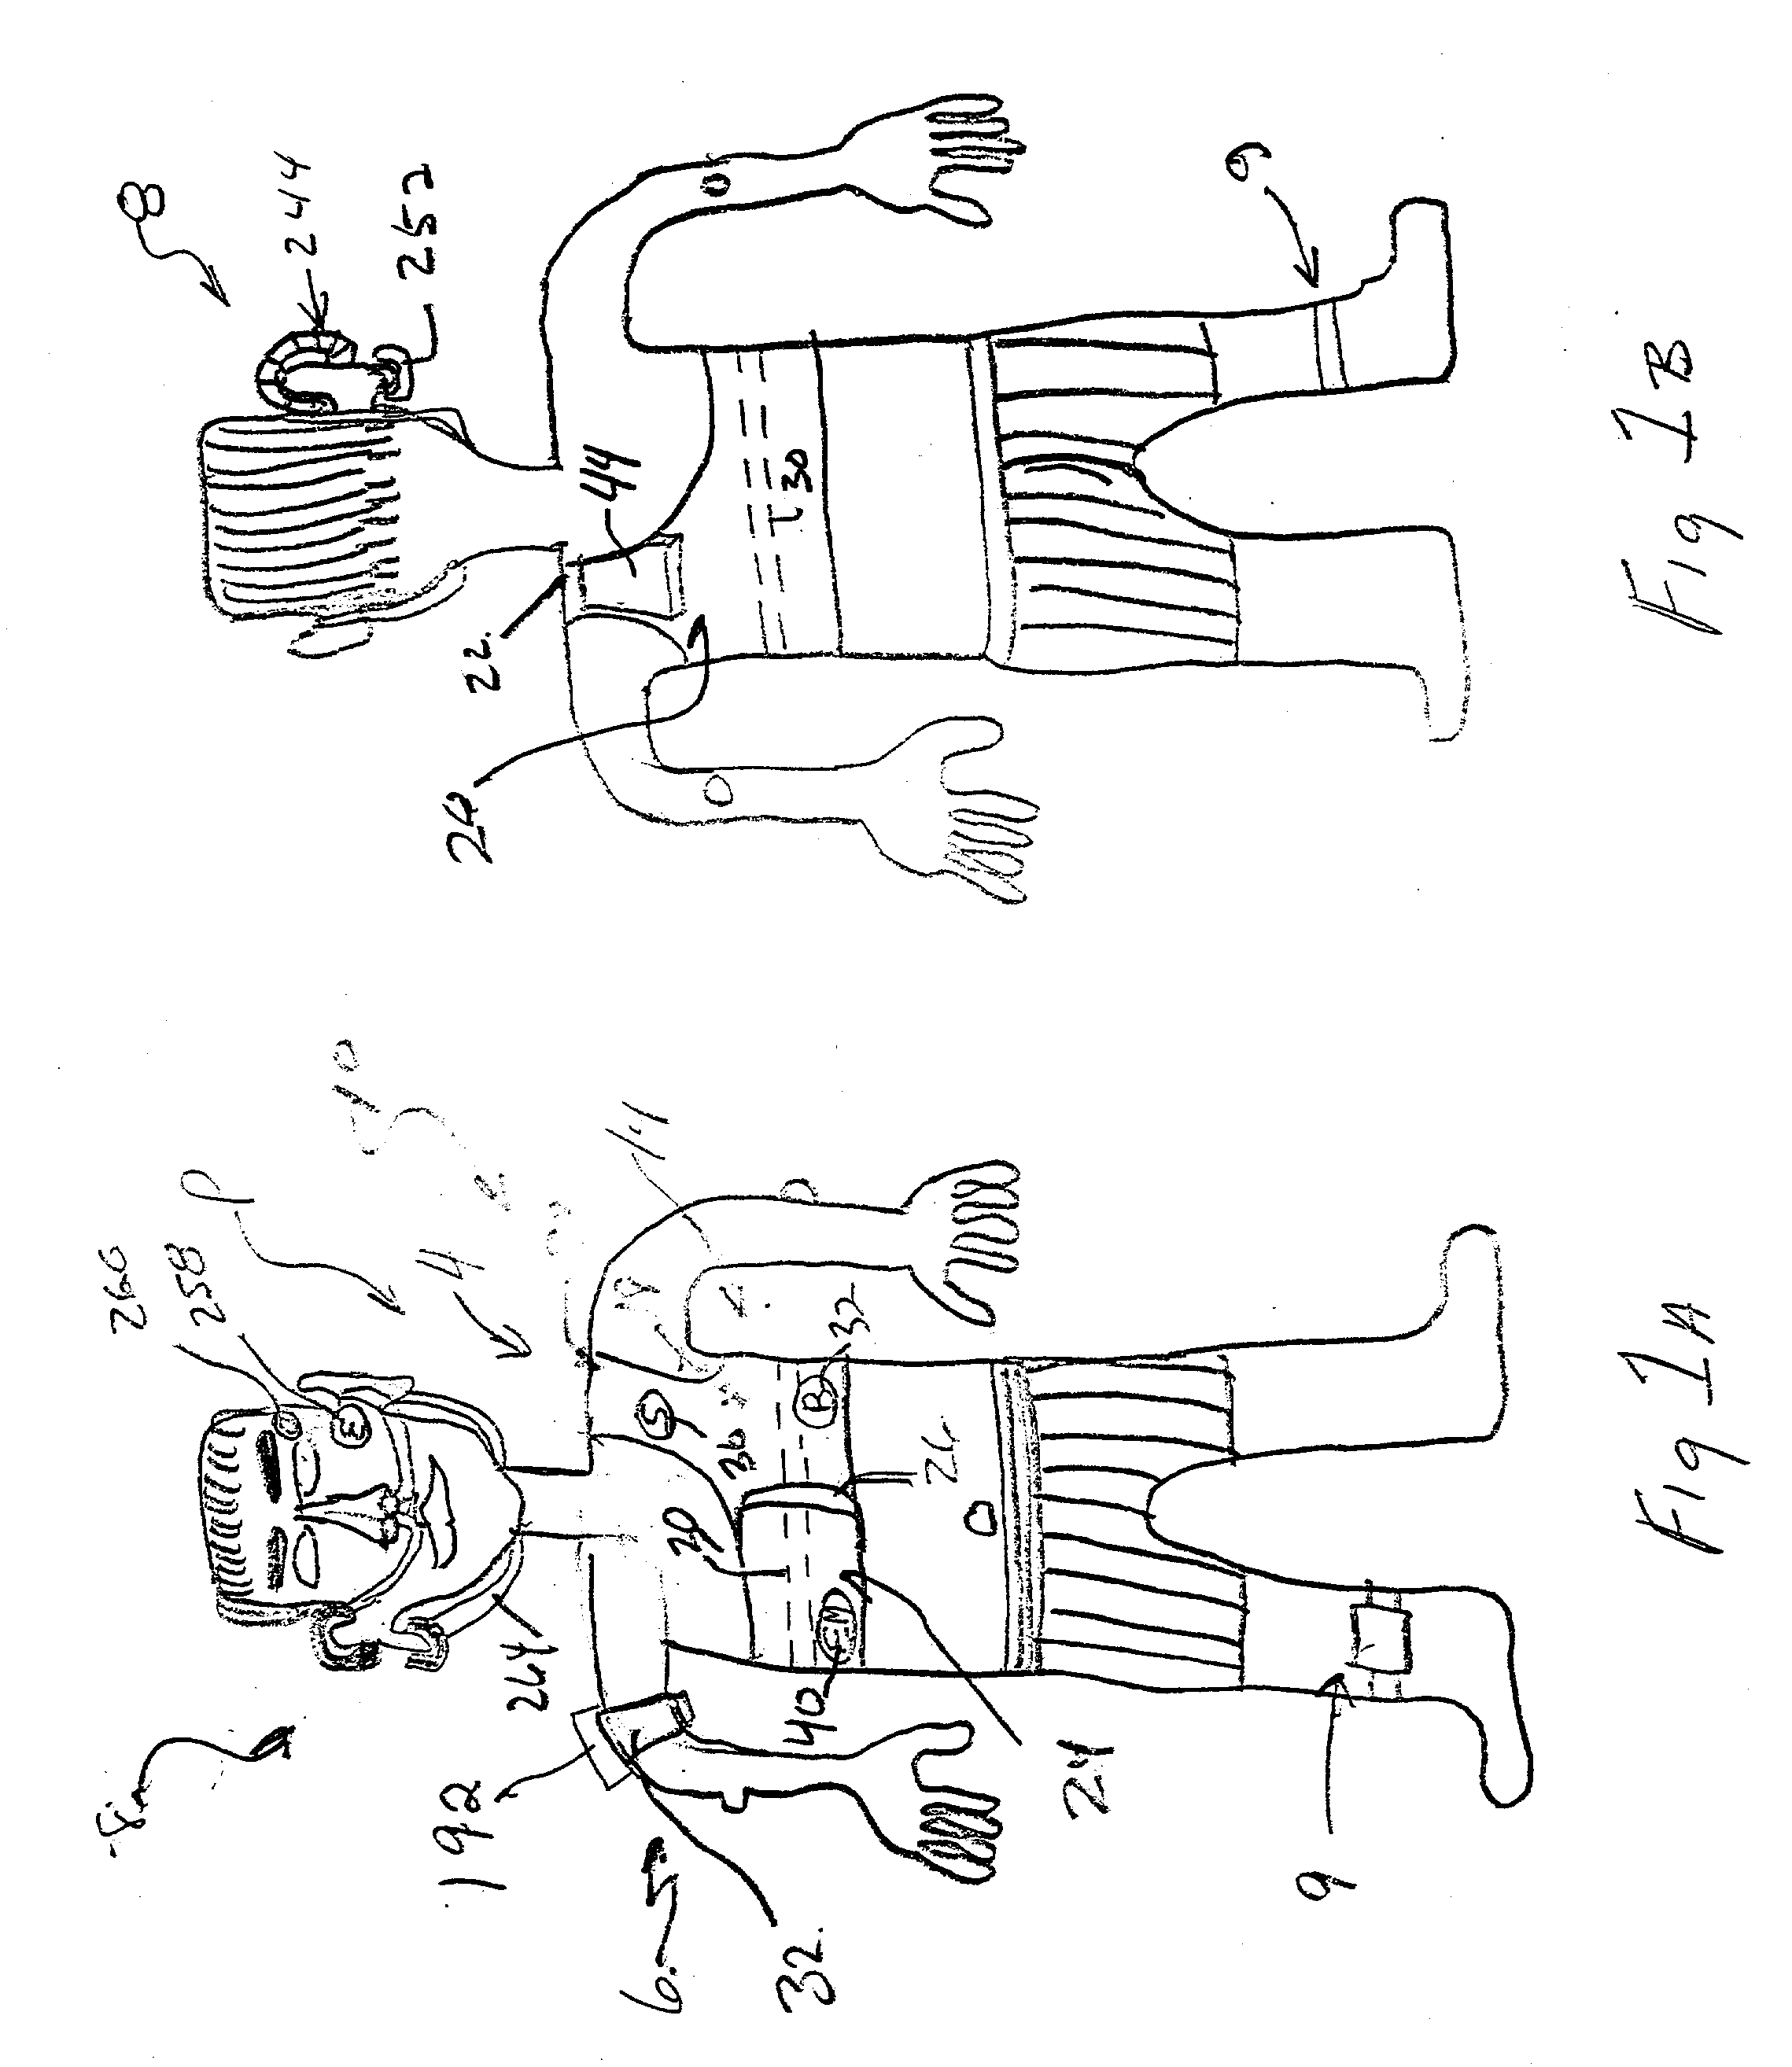 Device and method for treating disordered breathing